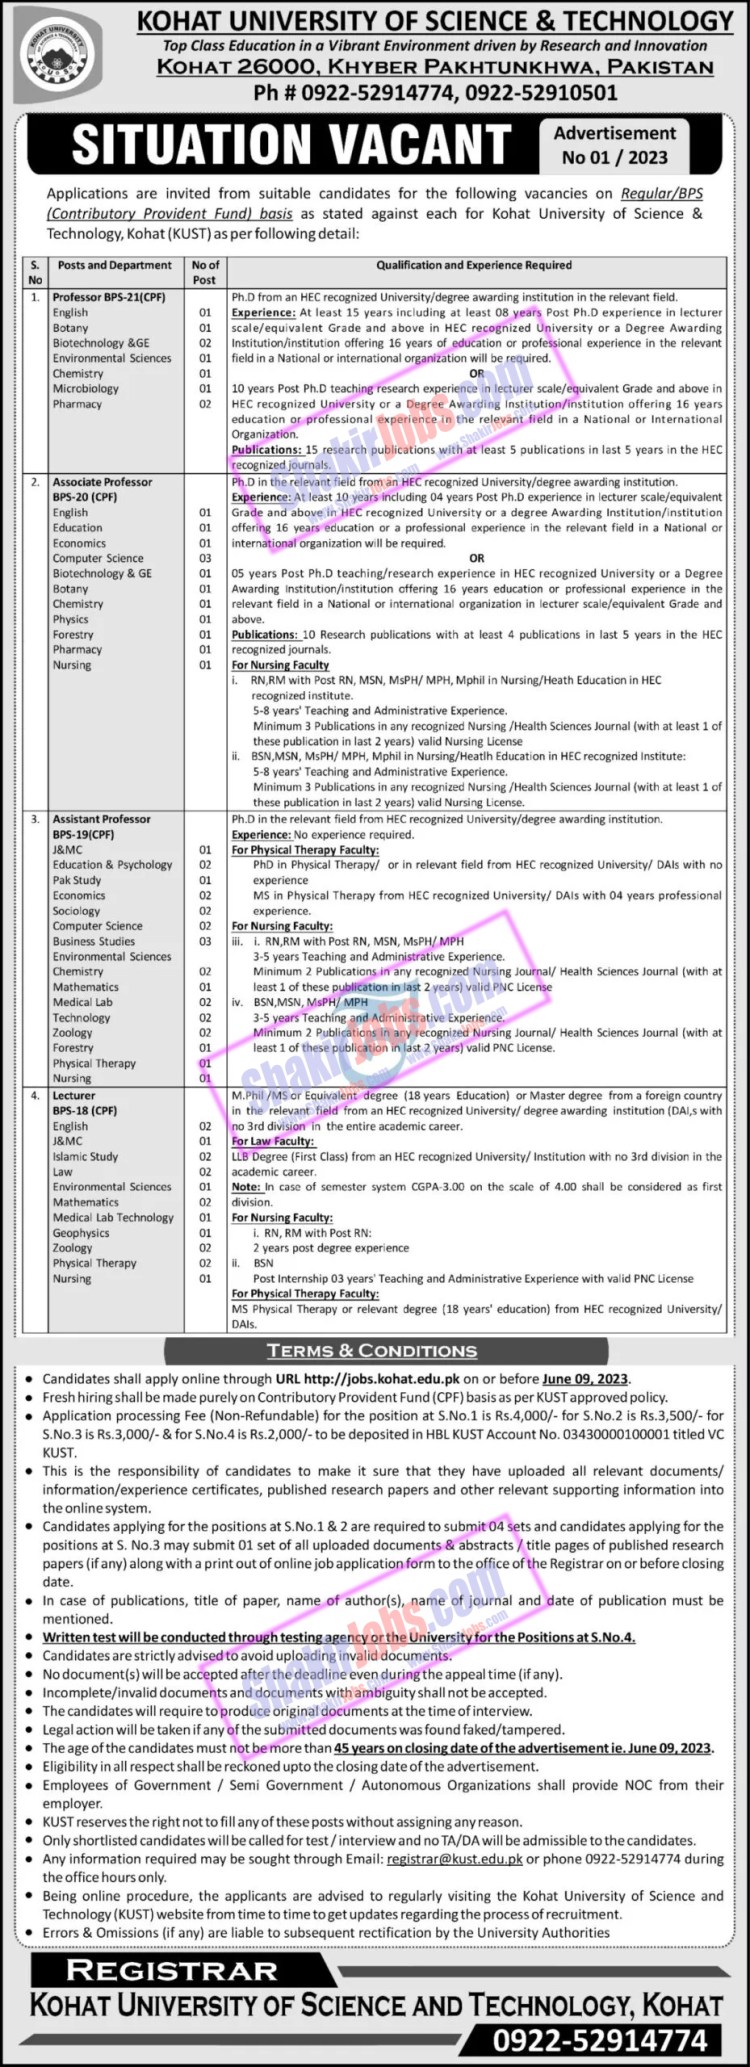 Kohat University of Science and Technology KUST Jobs June 2023 Ad 1